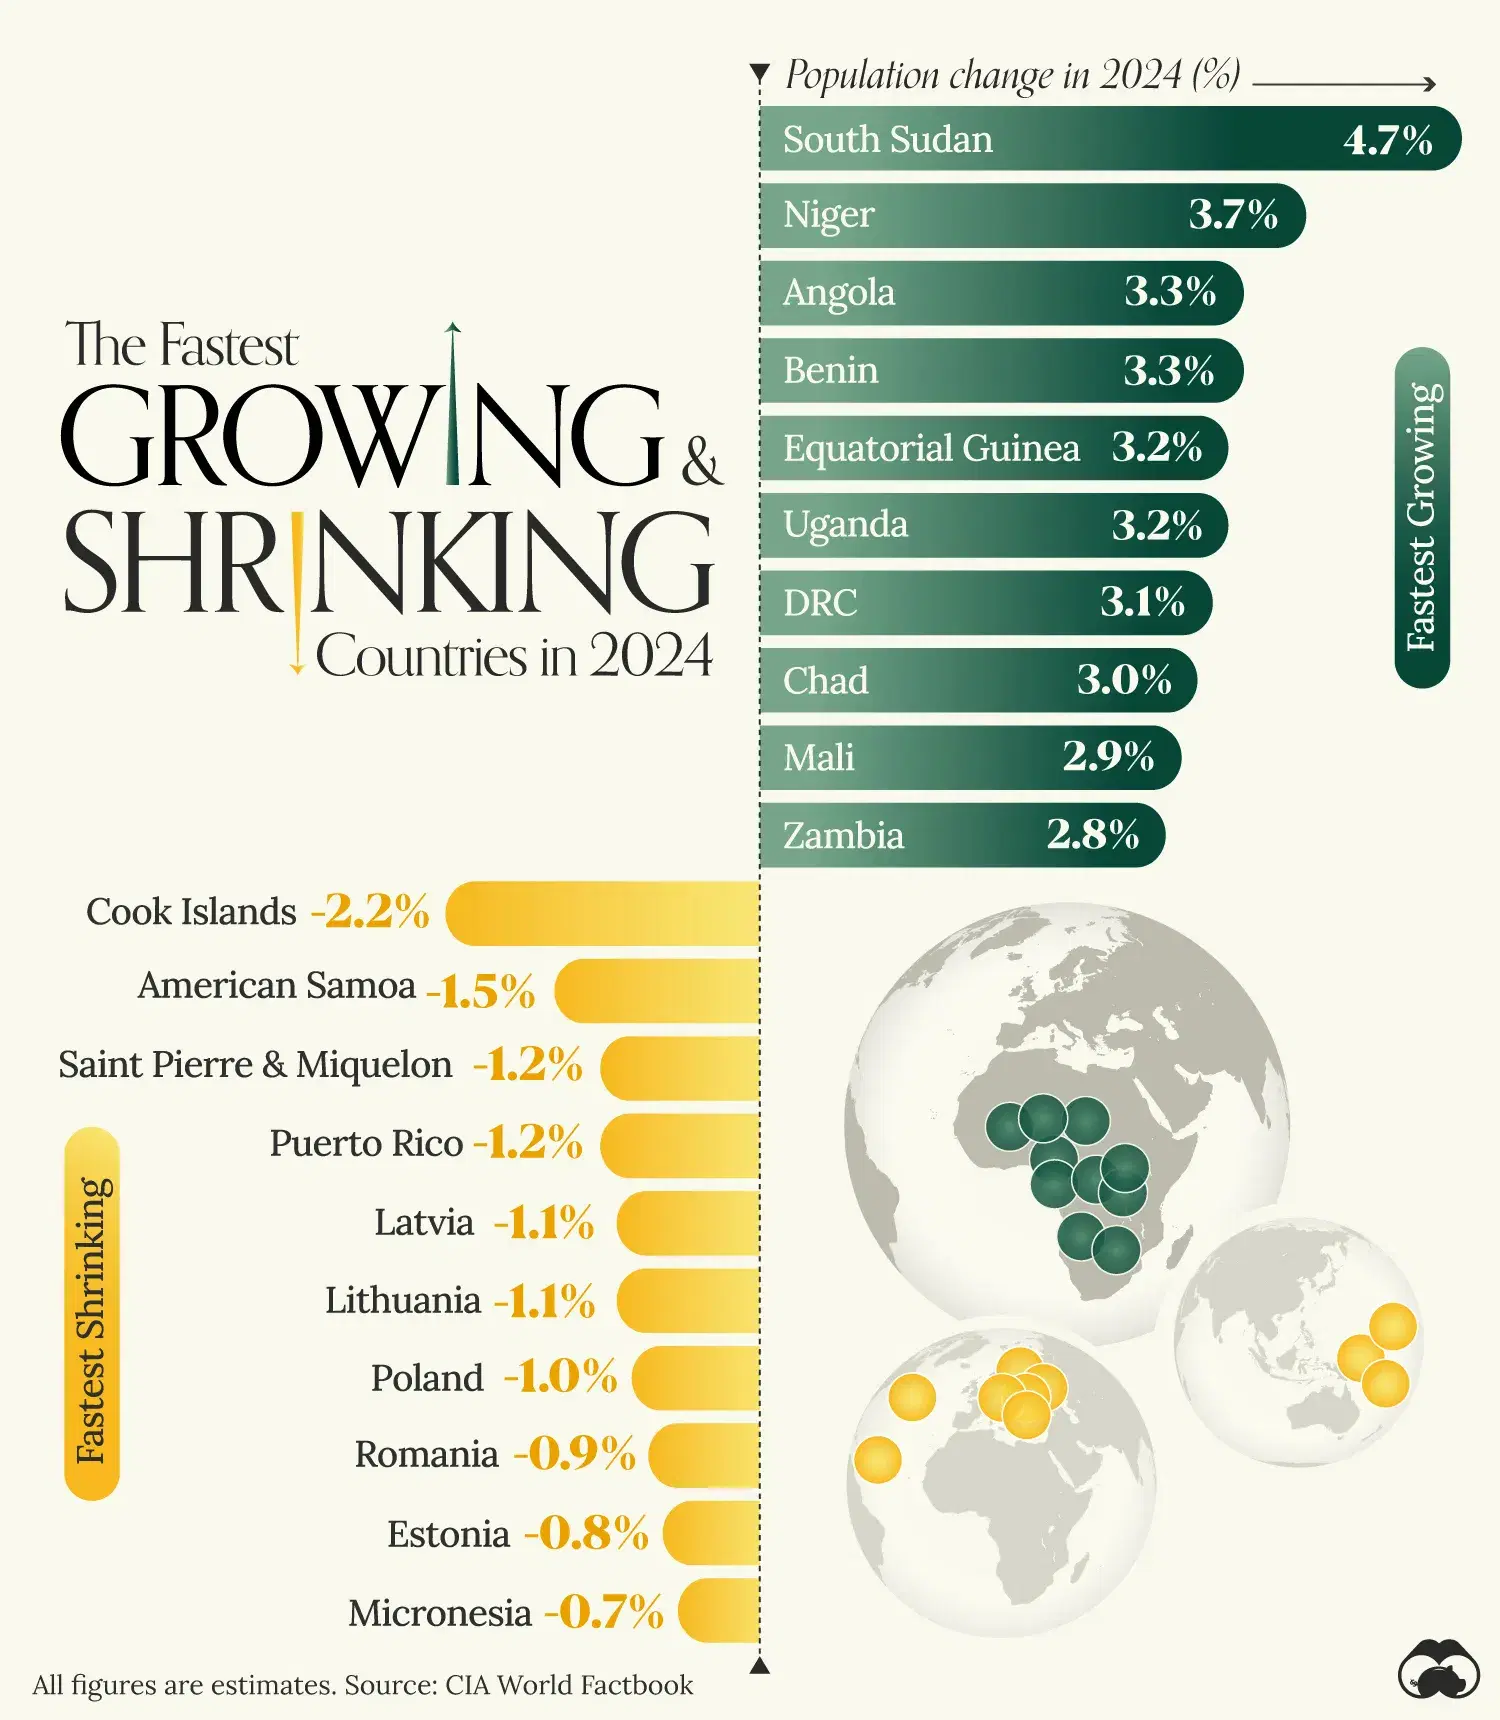 Top 10 Fastest Growing & Shrinking Countries in 2024